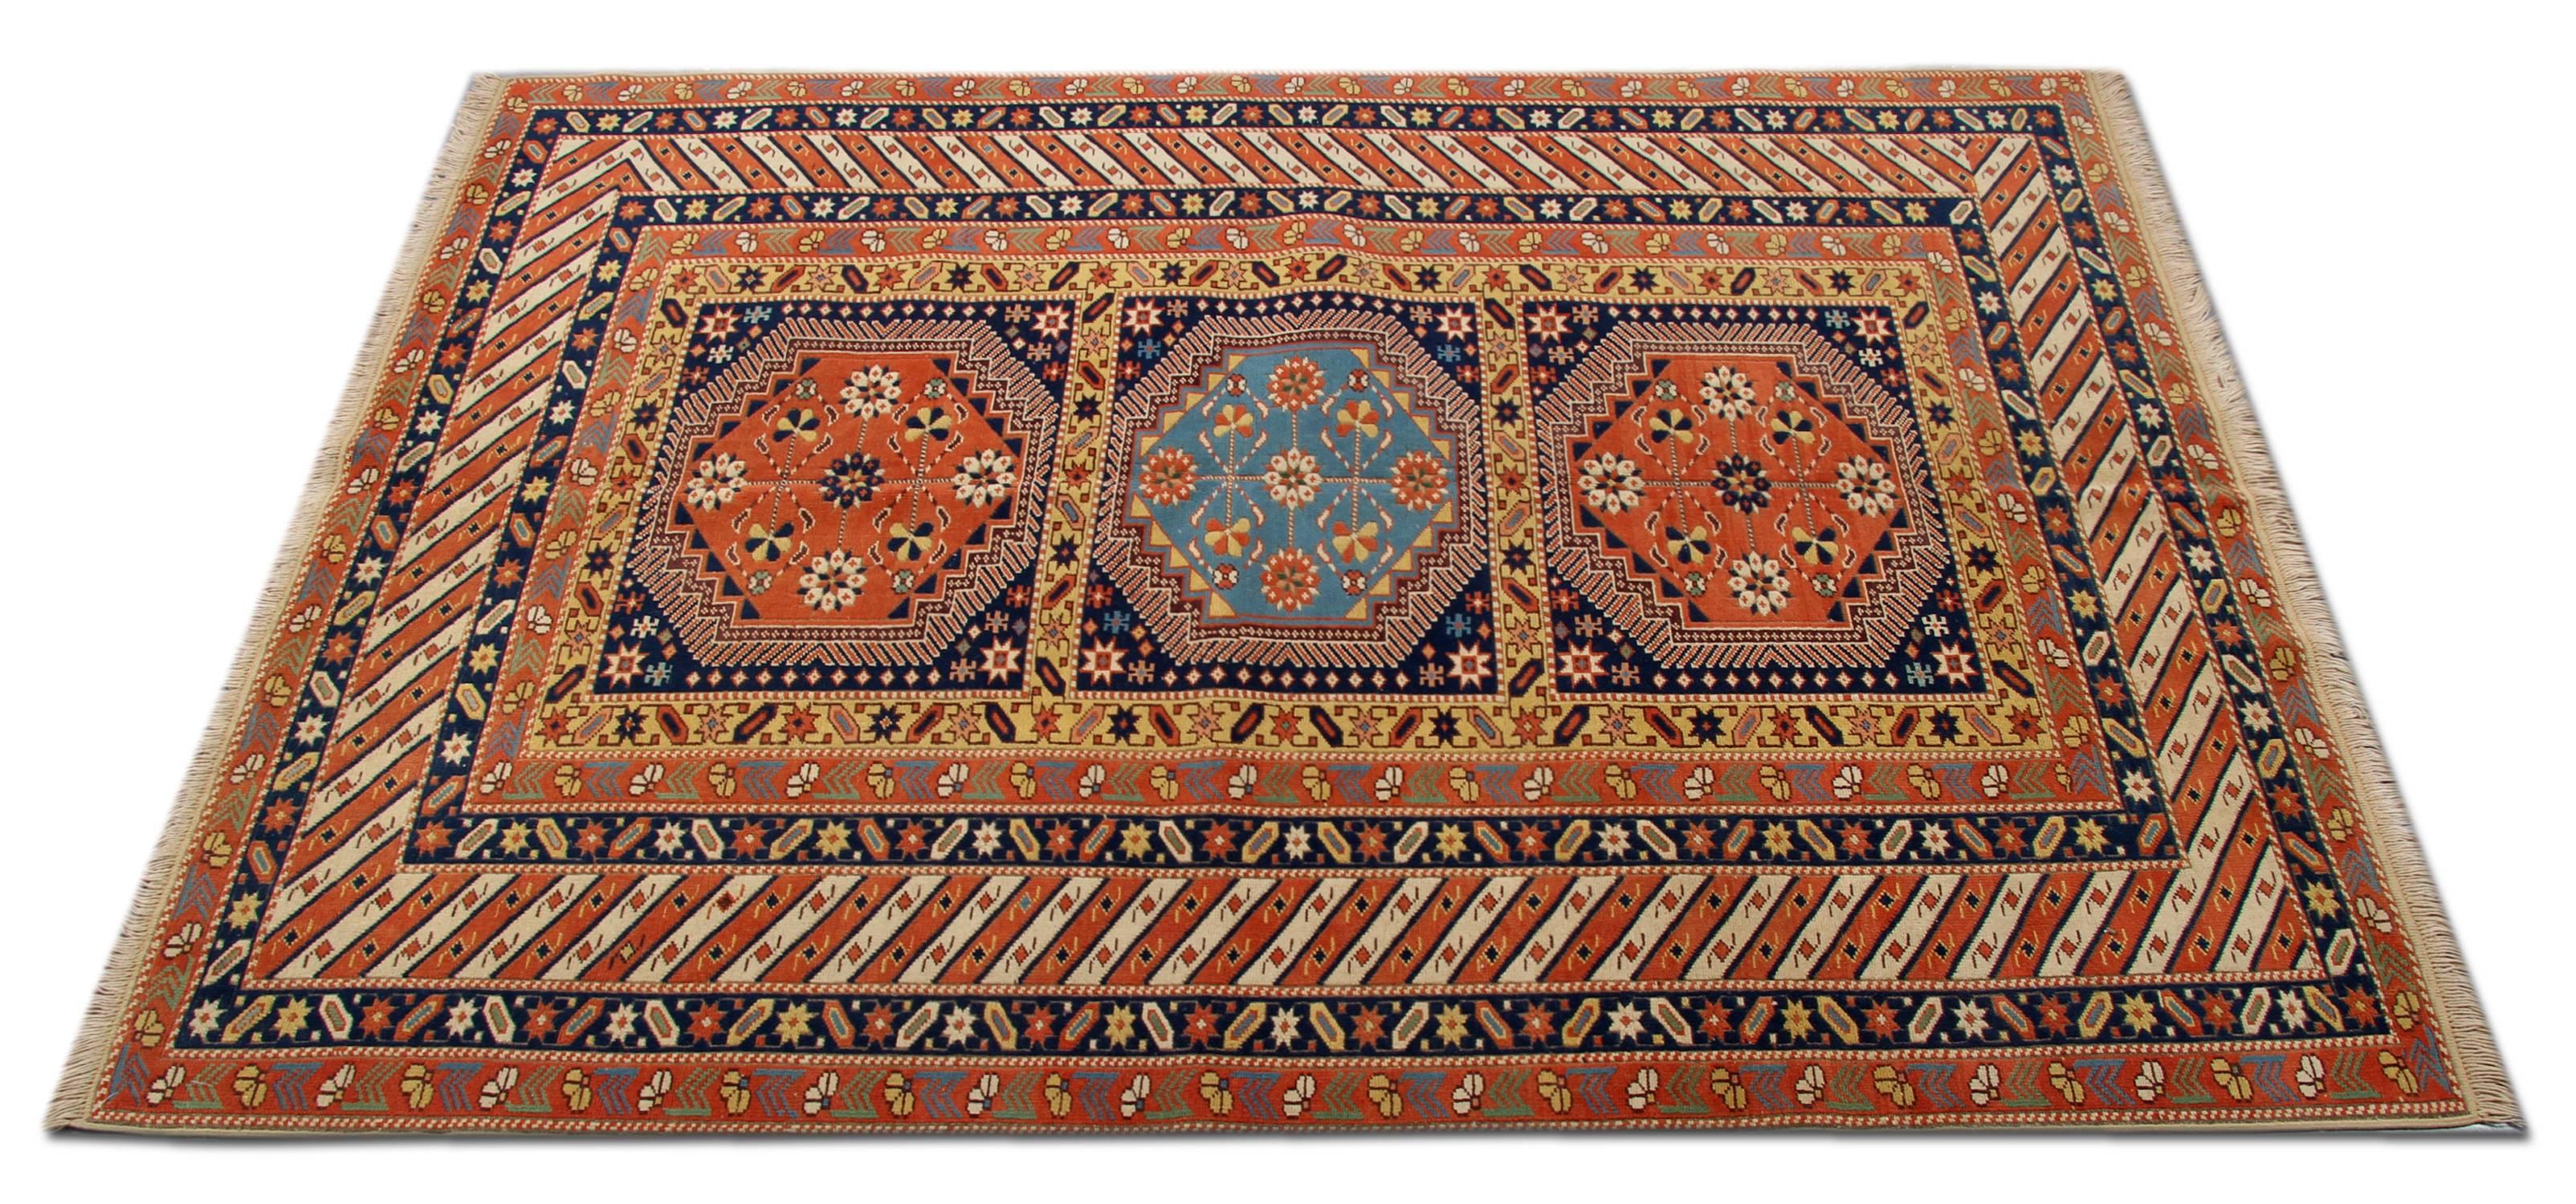 This new traditional woven rug comes in a striking color combination. The tribal rug has bright red, navy, sea blue, cream and caramel colors. This geometric rug has a floral rug design and three similar repeating patterns. The pattern depicted on